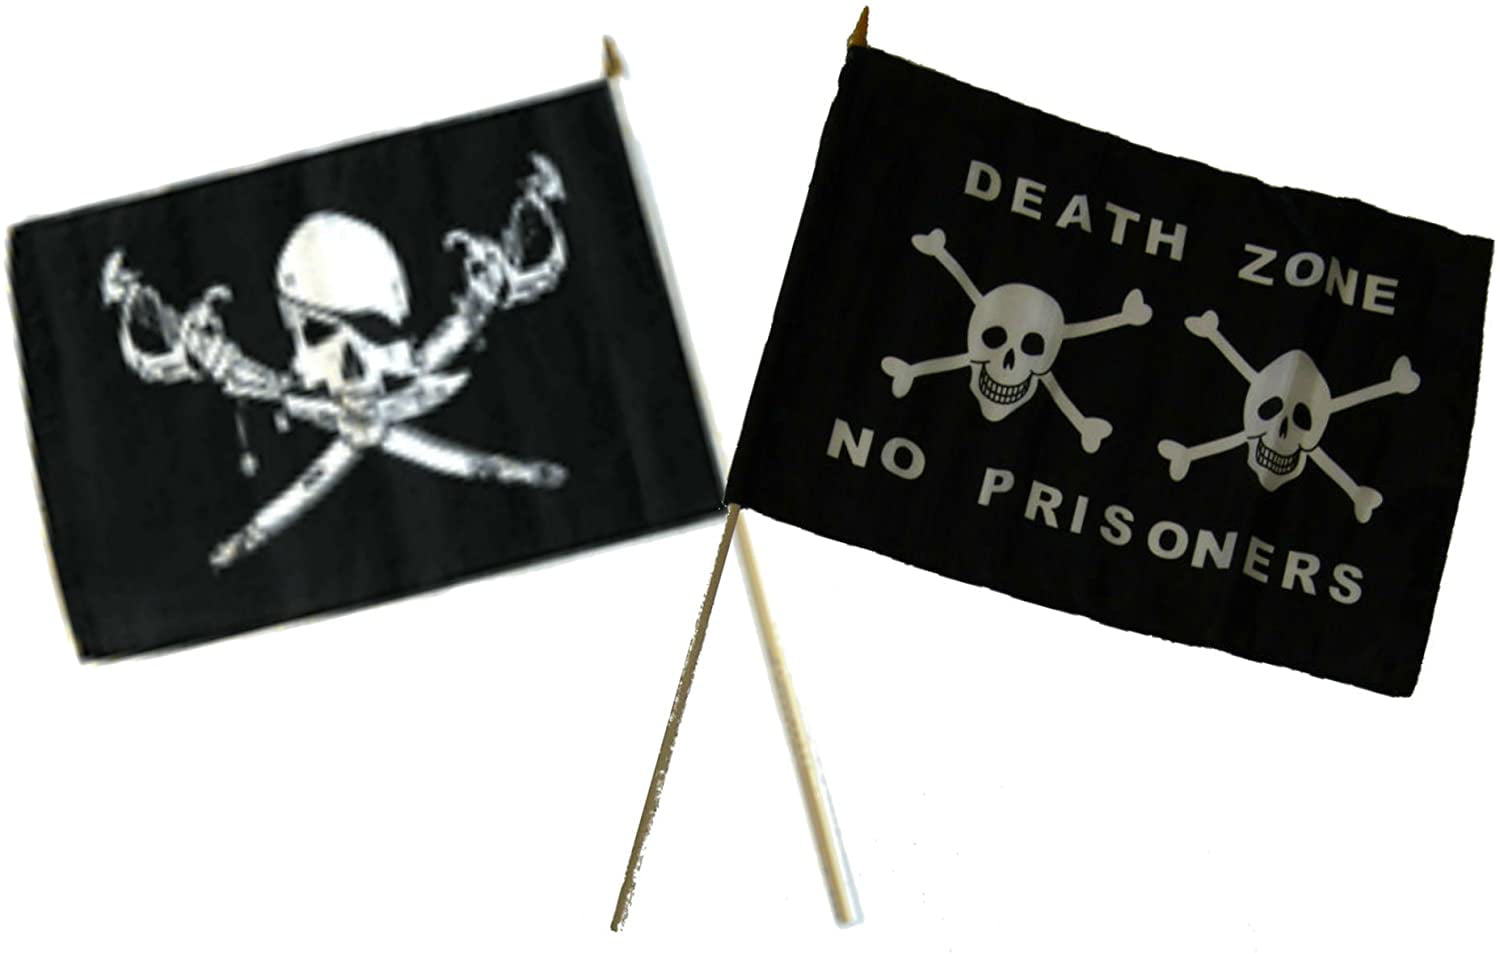 12x18 12"x18" Wholesale Lot of 6 Jolly Roger Pirate Death Zone Stick Flag 